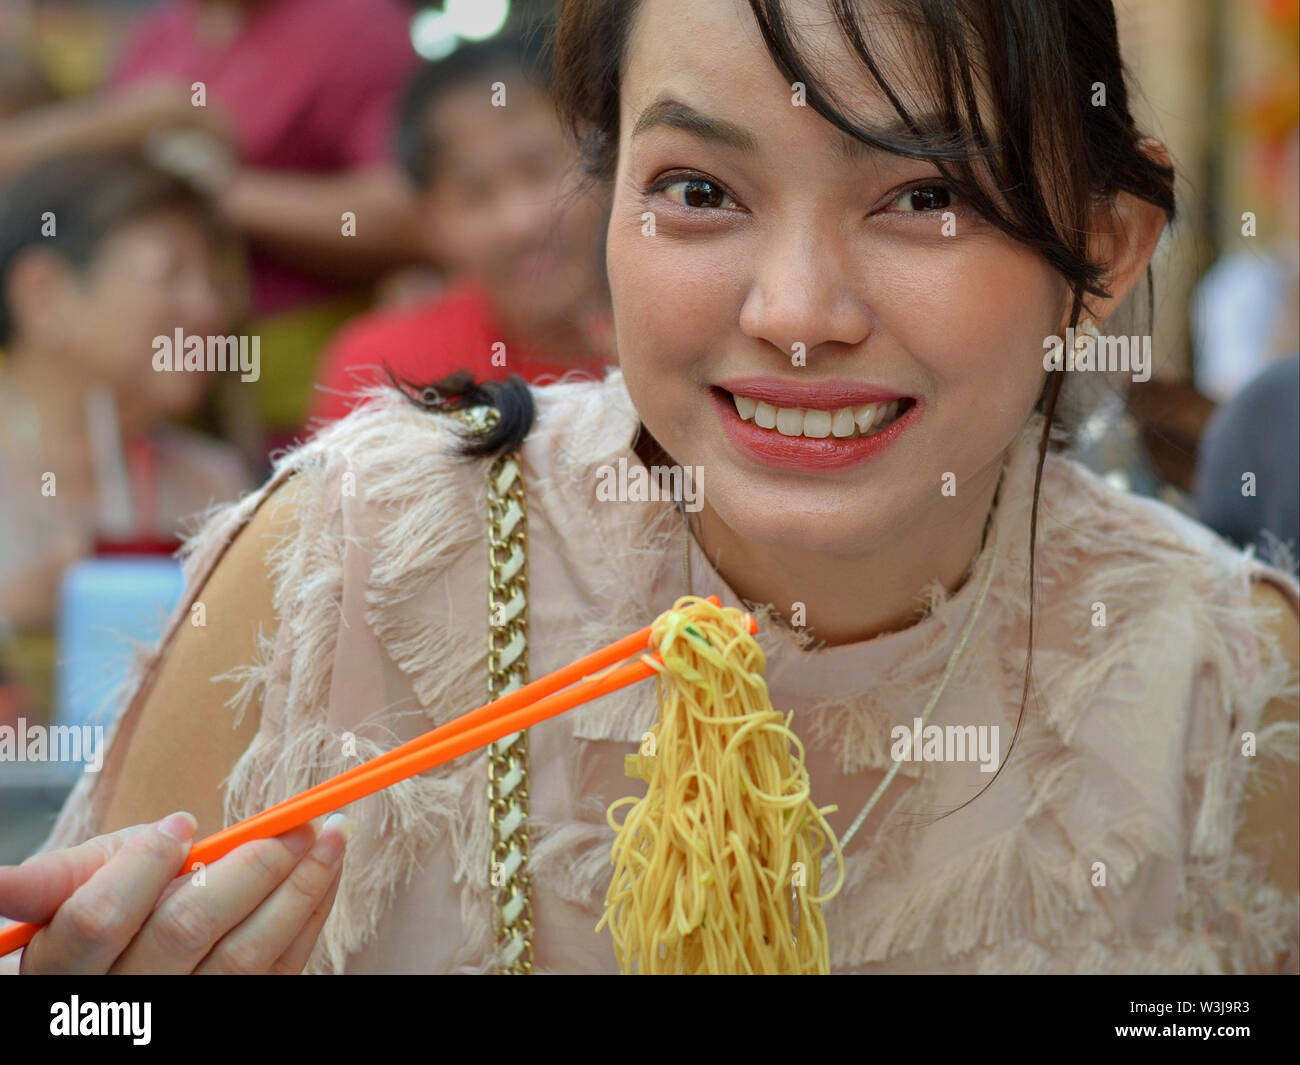 Glamorous Thai beauty eats skillfully dry yellow noodles with a pair of orange-colored plastic chopsticks and smiles for the camera. Stock Photo